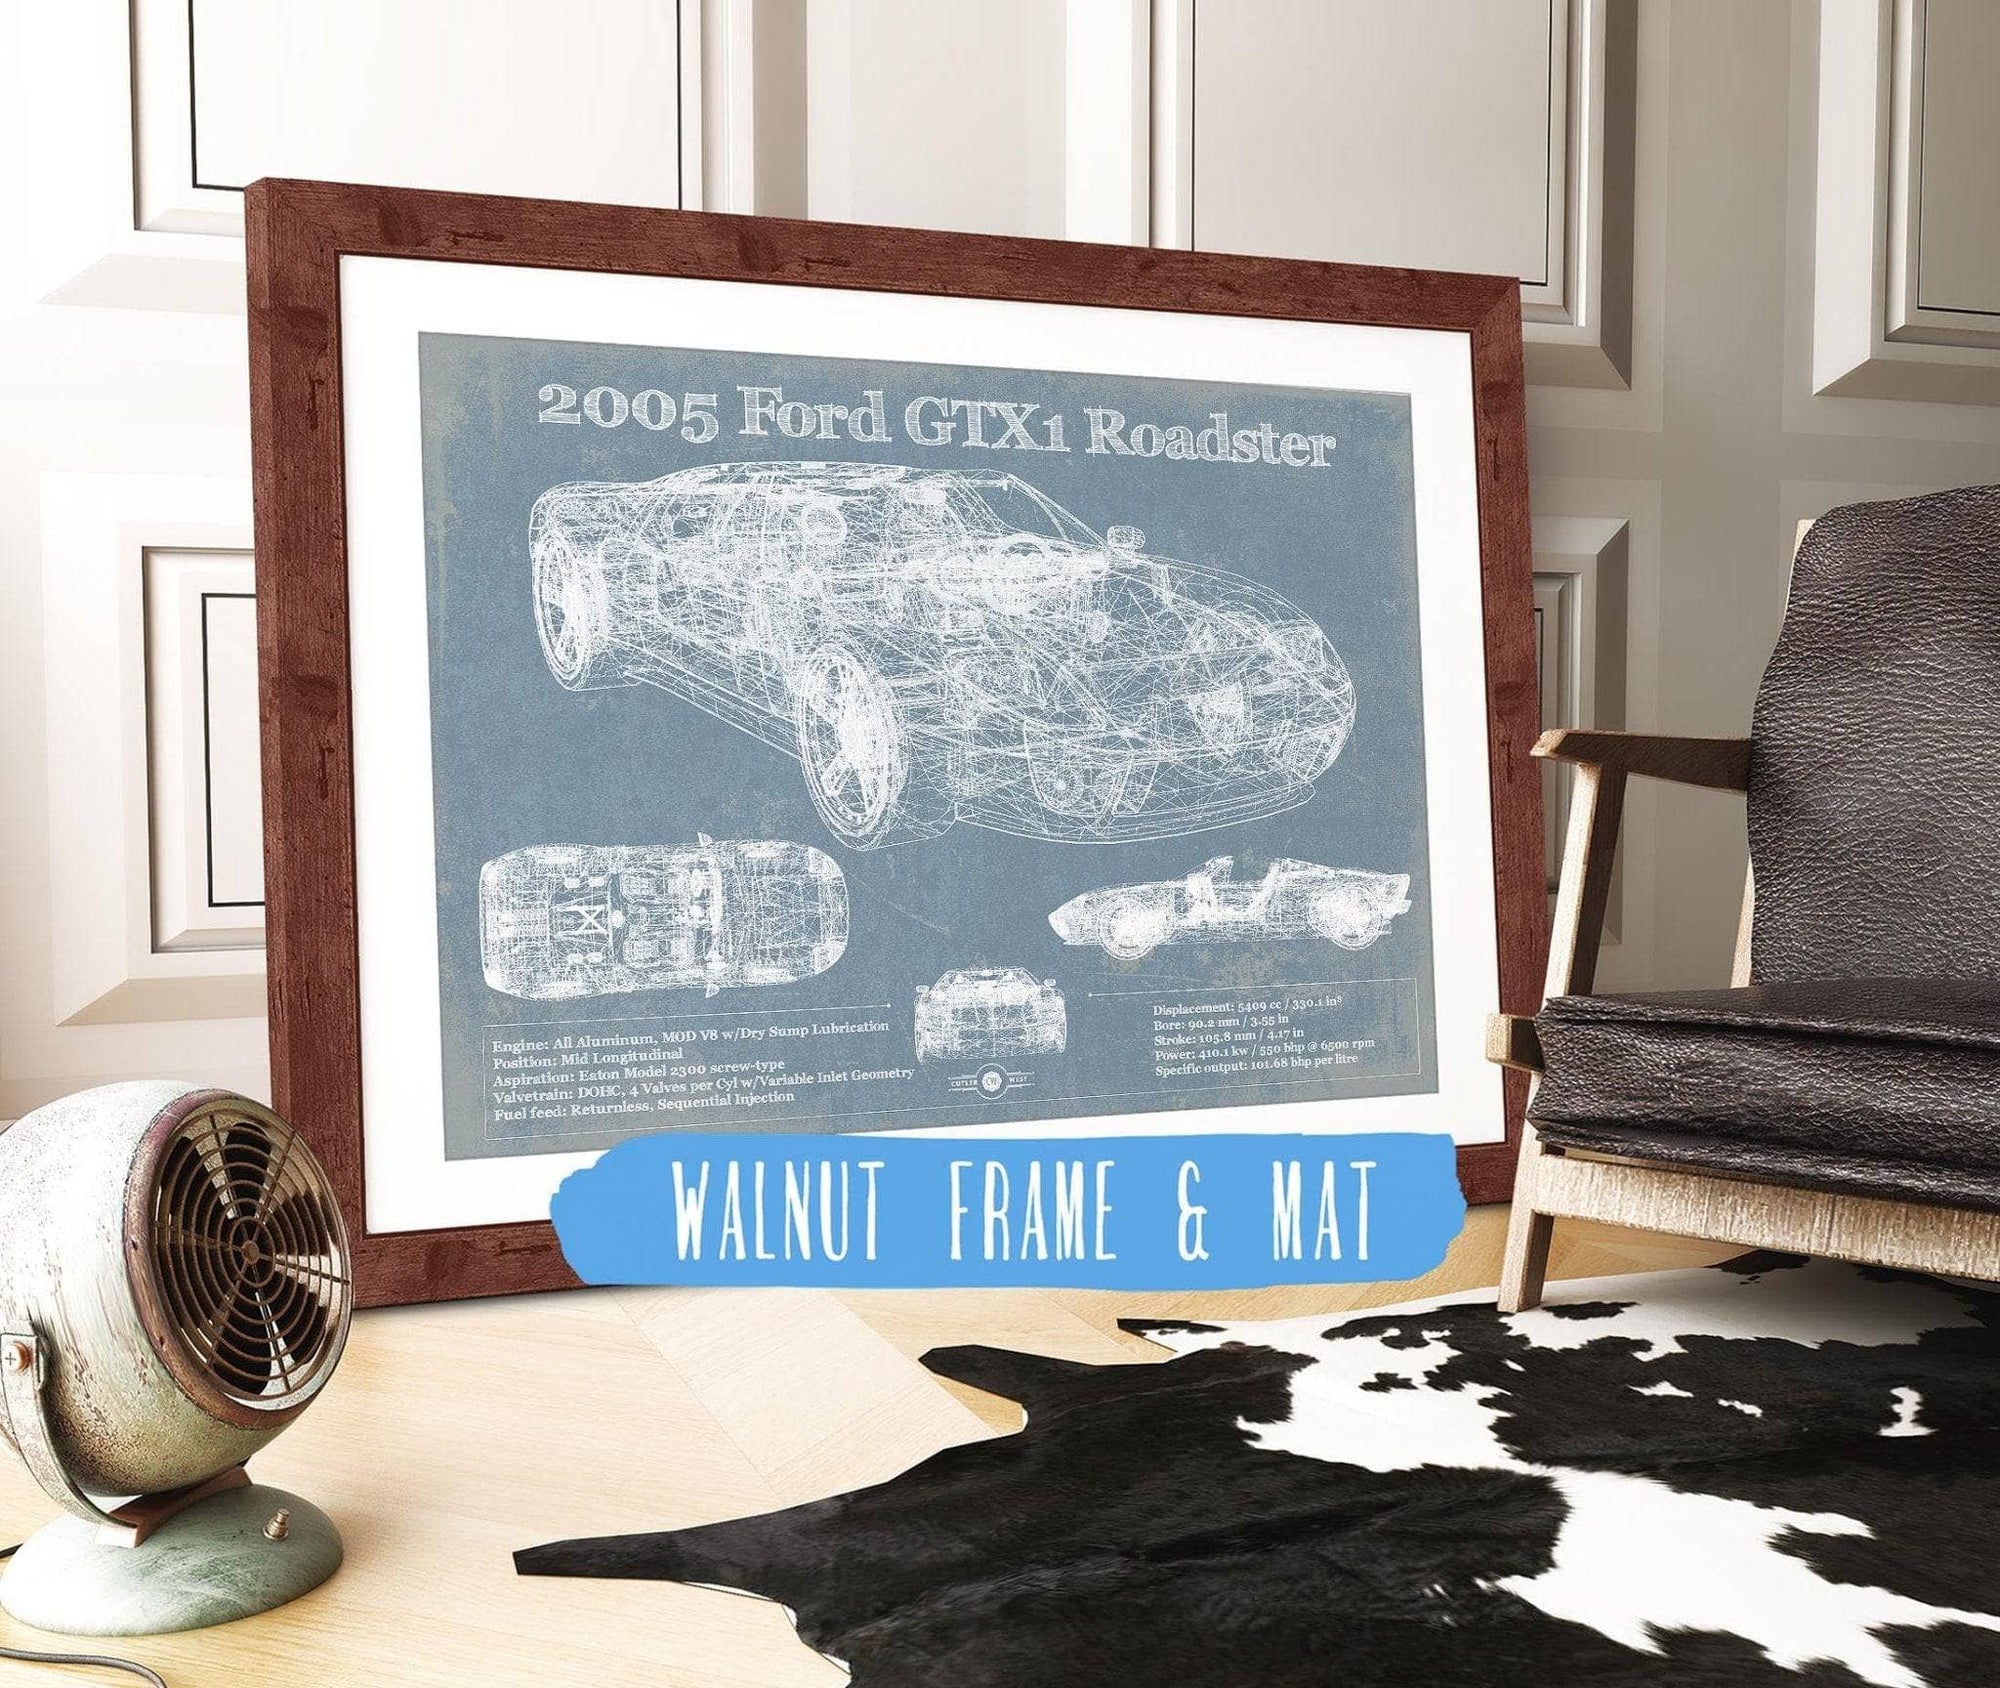 Cutler West Ford Collection 20" x 16" / Walnut Frame & Mat 2005 Ford GTX1 Roadster Vintage Blueprint Auto Print 933350037_17749